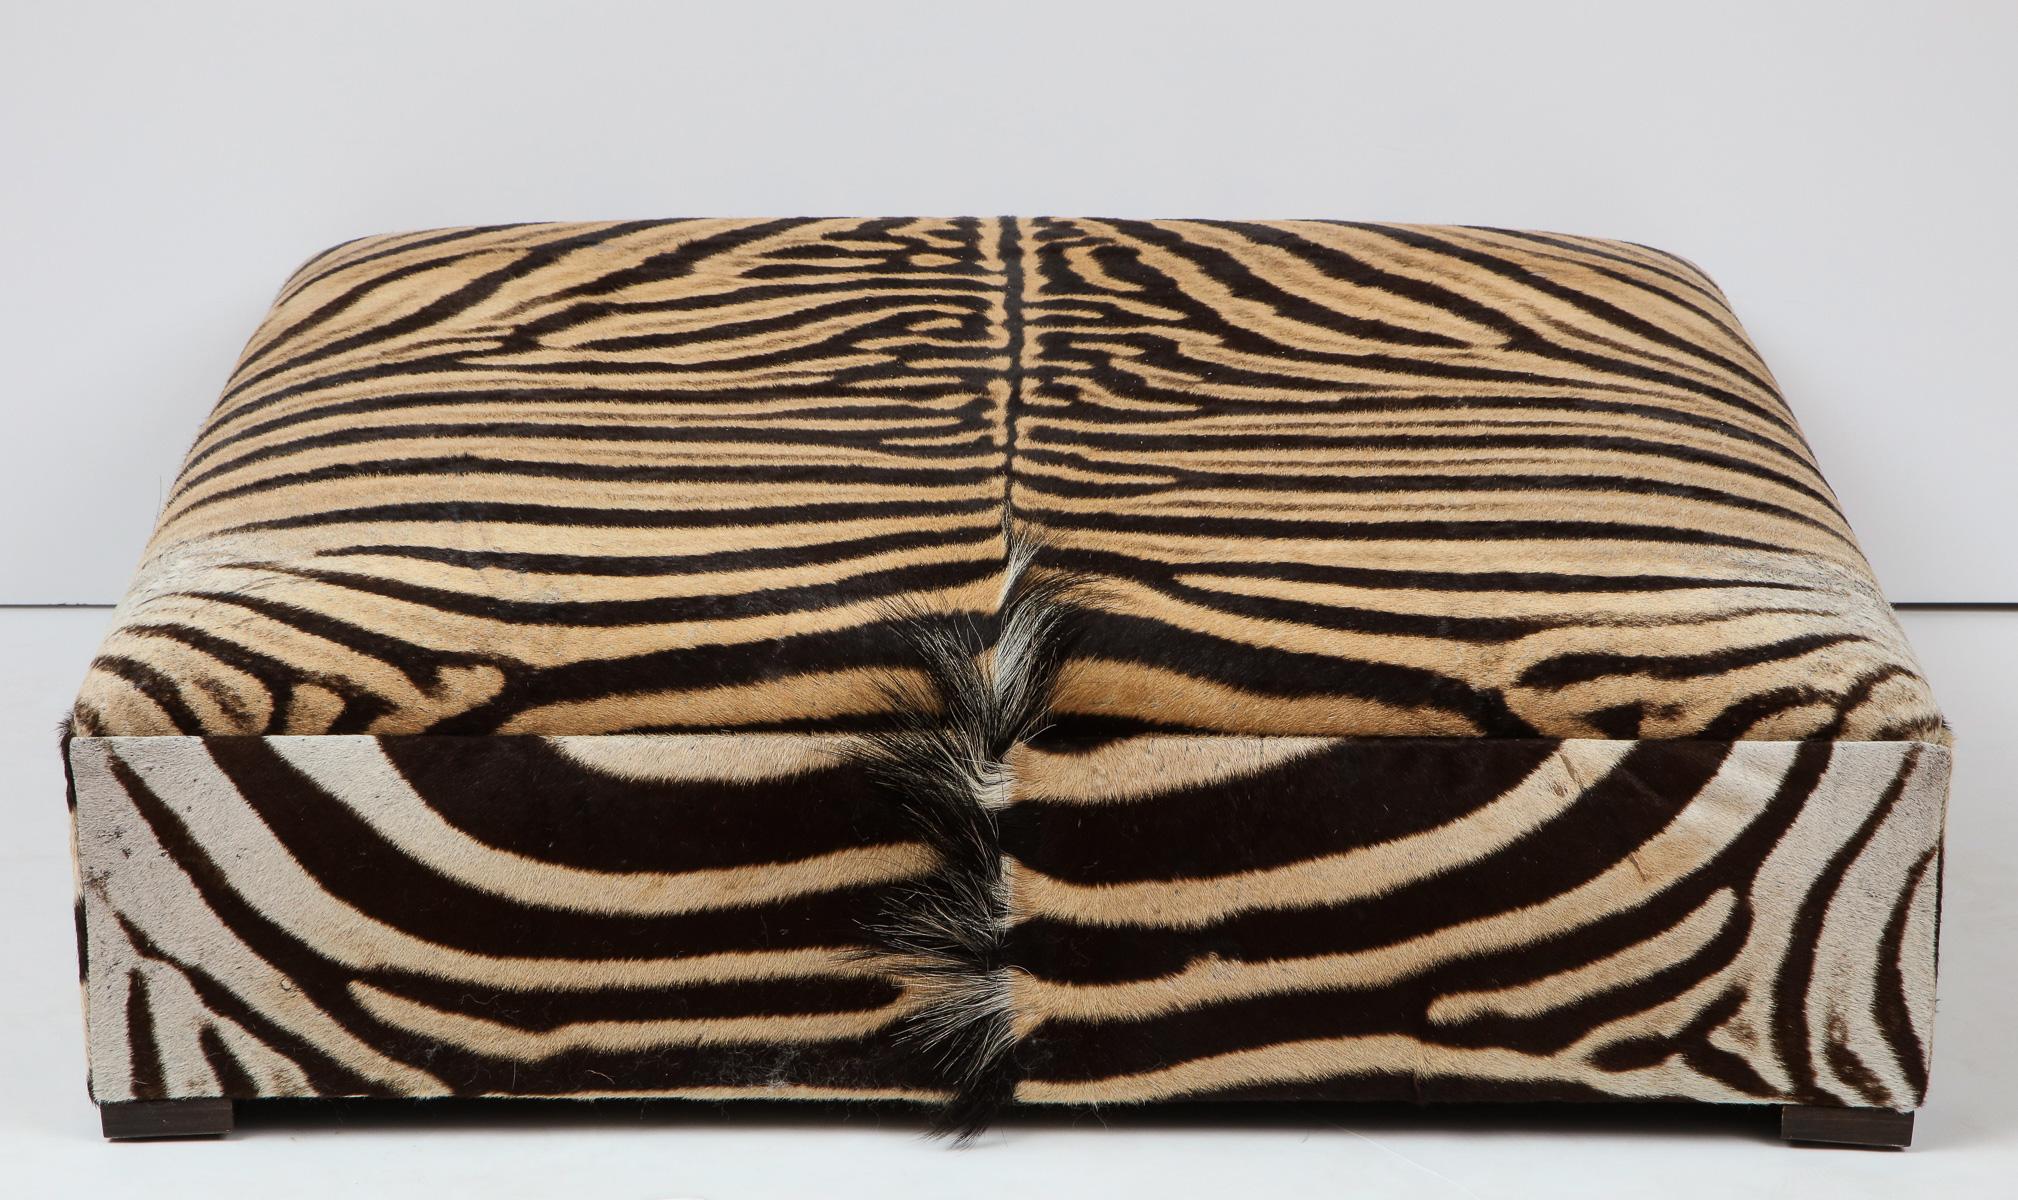 Large zebra ottoman, measures: 42 inches by 42 inches and 14 inches high. Great as a coffee table or ottoman. Built in our NJ factory.
Made of beautiful zebra hides from South Africa.
This ottoman is sold but we have another one in stock. Please